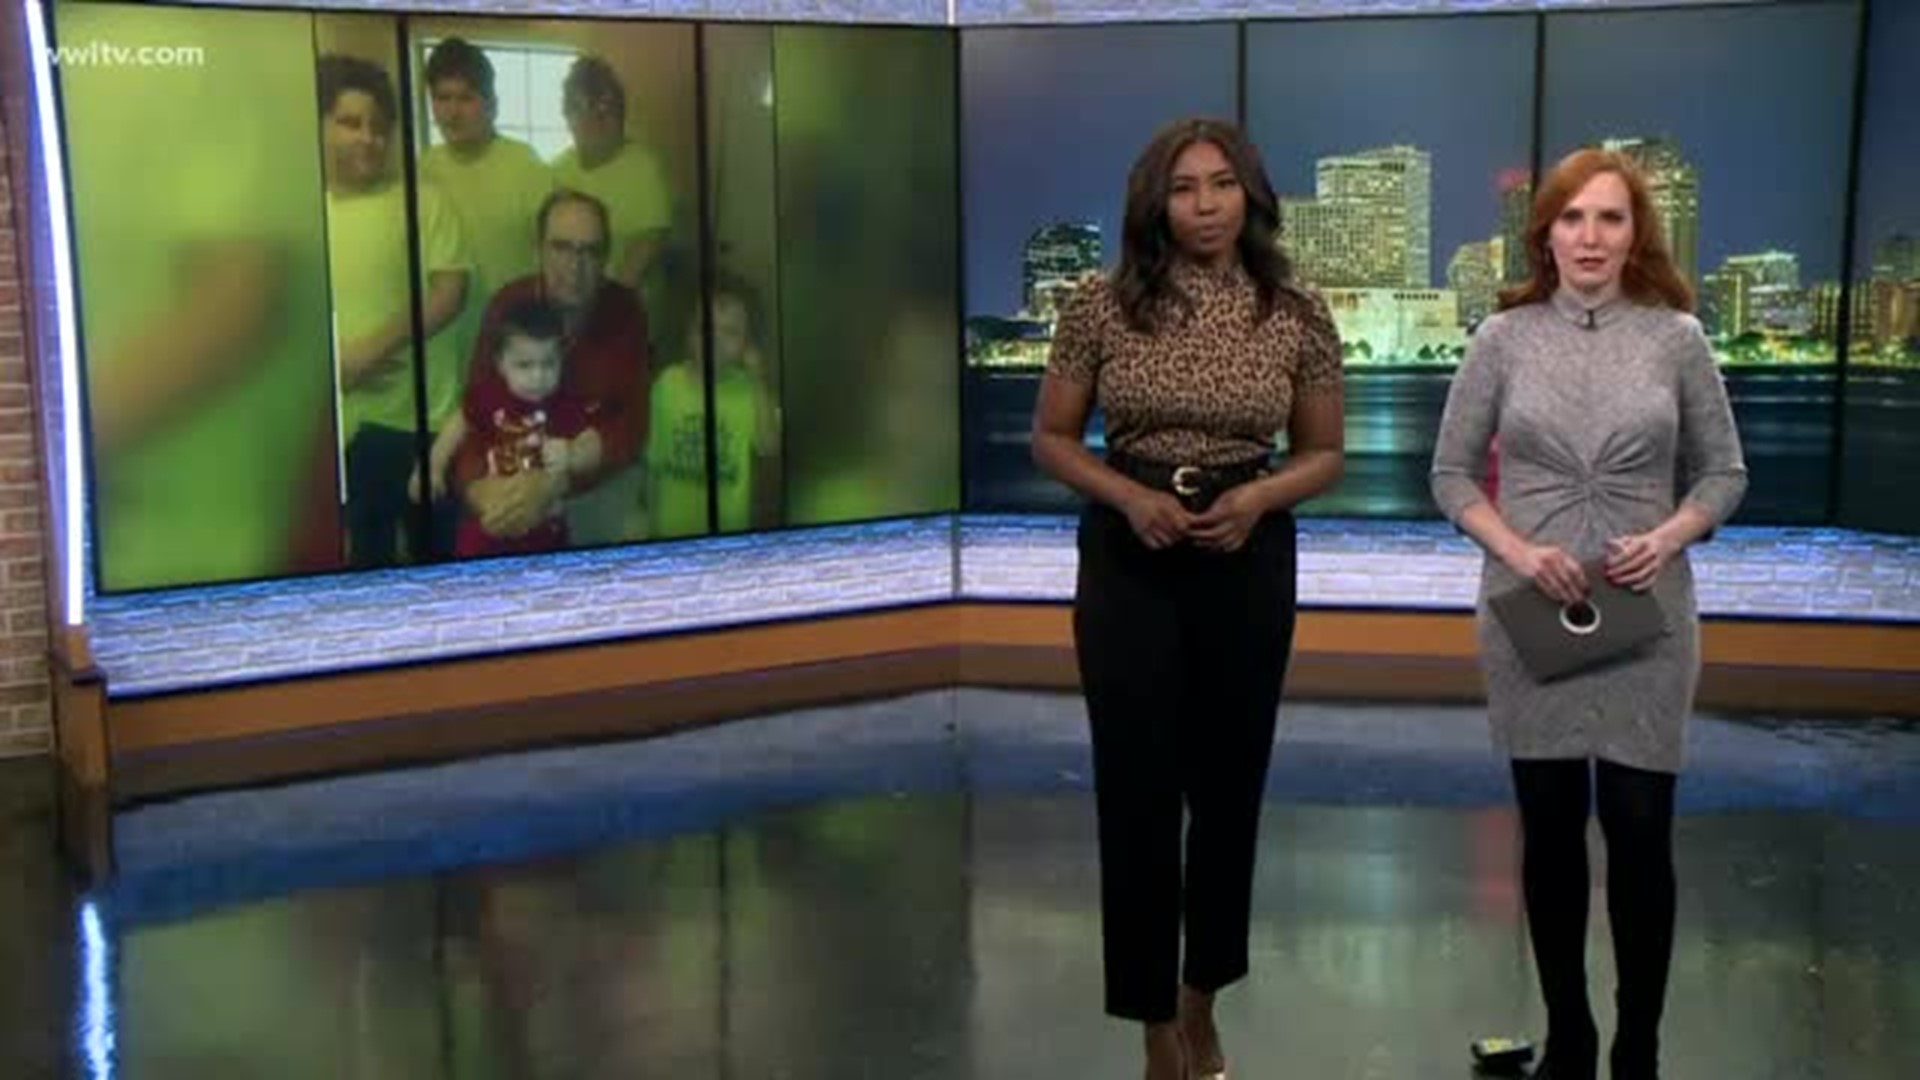 5 children from Louisiana become orphans in series of tragedies